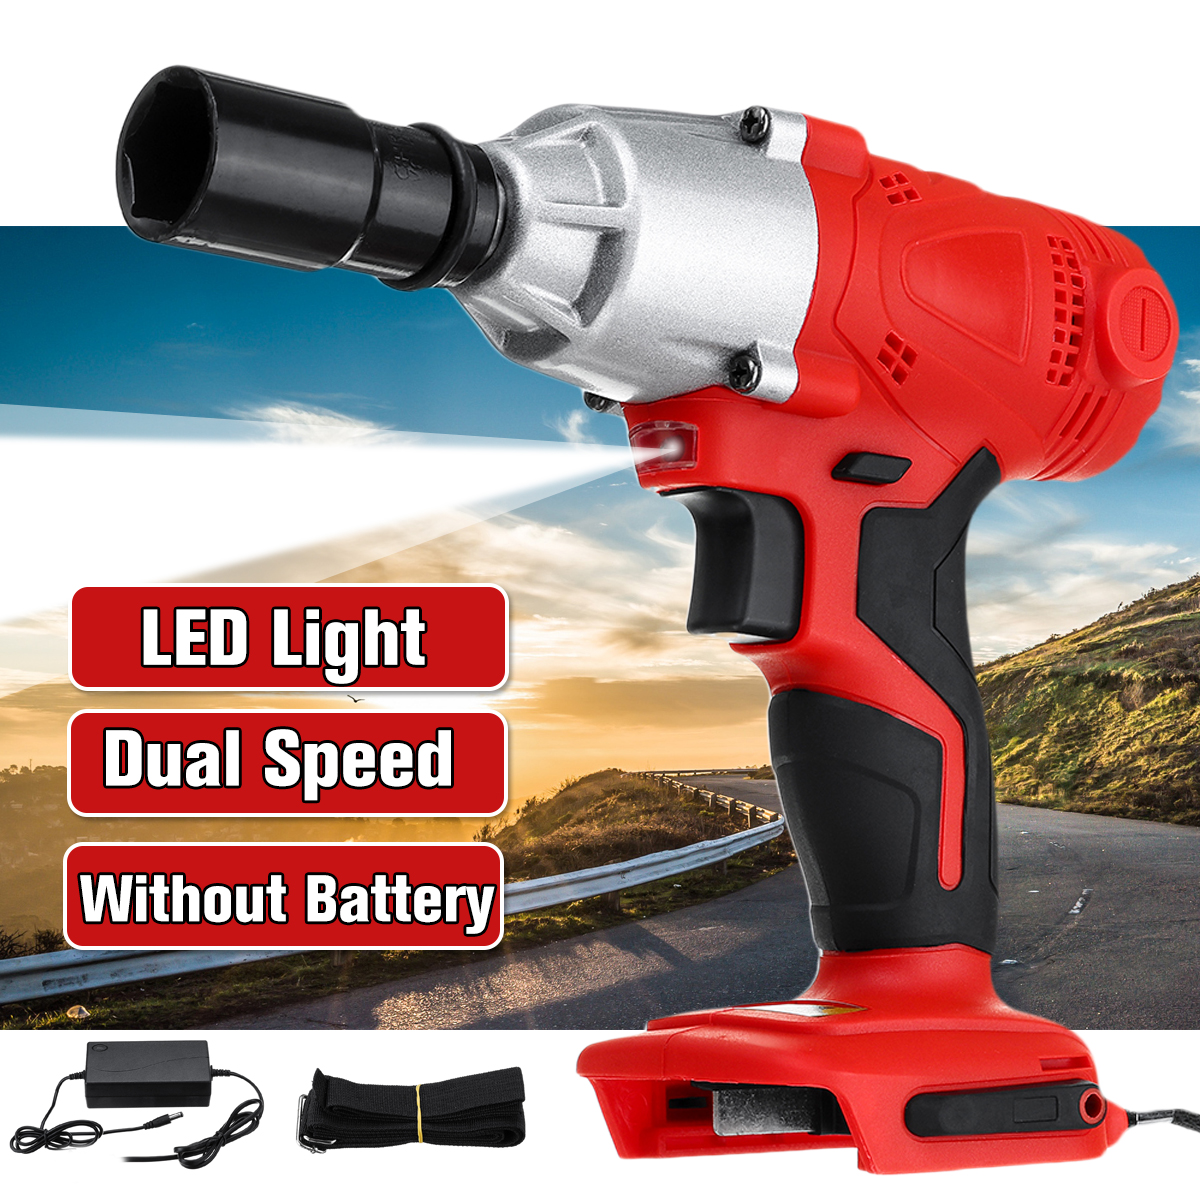 180V-240V-Cordless-LED-Light-Impact-Wrench-50Hz-350-Nm-Waterproof-Electric-Wrench-Adapted-To-18V-Mak-1590254-1